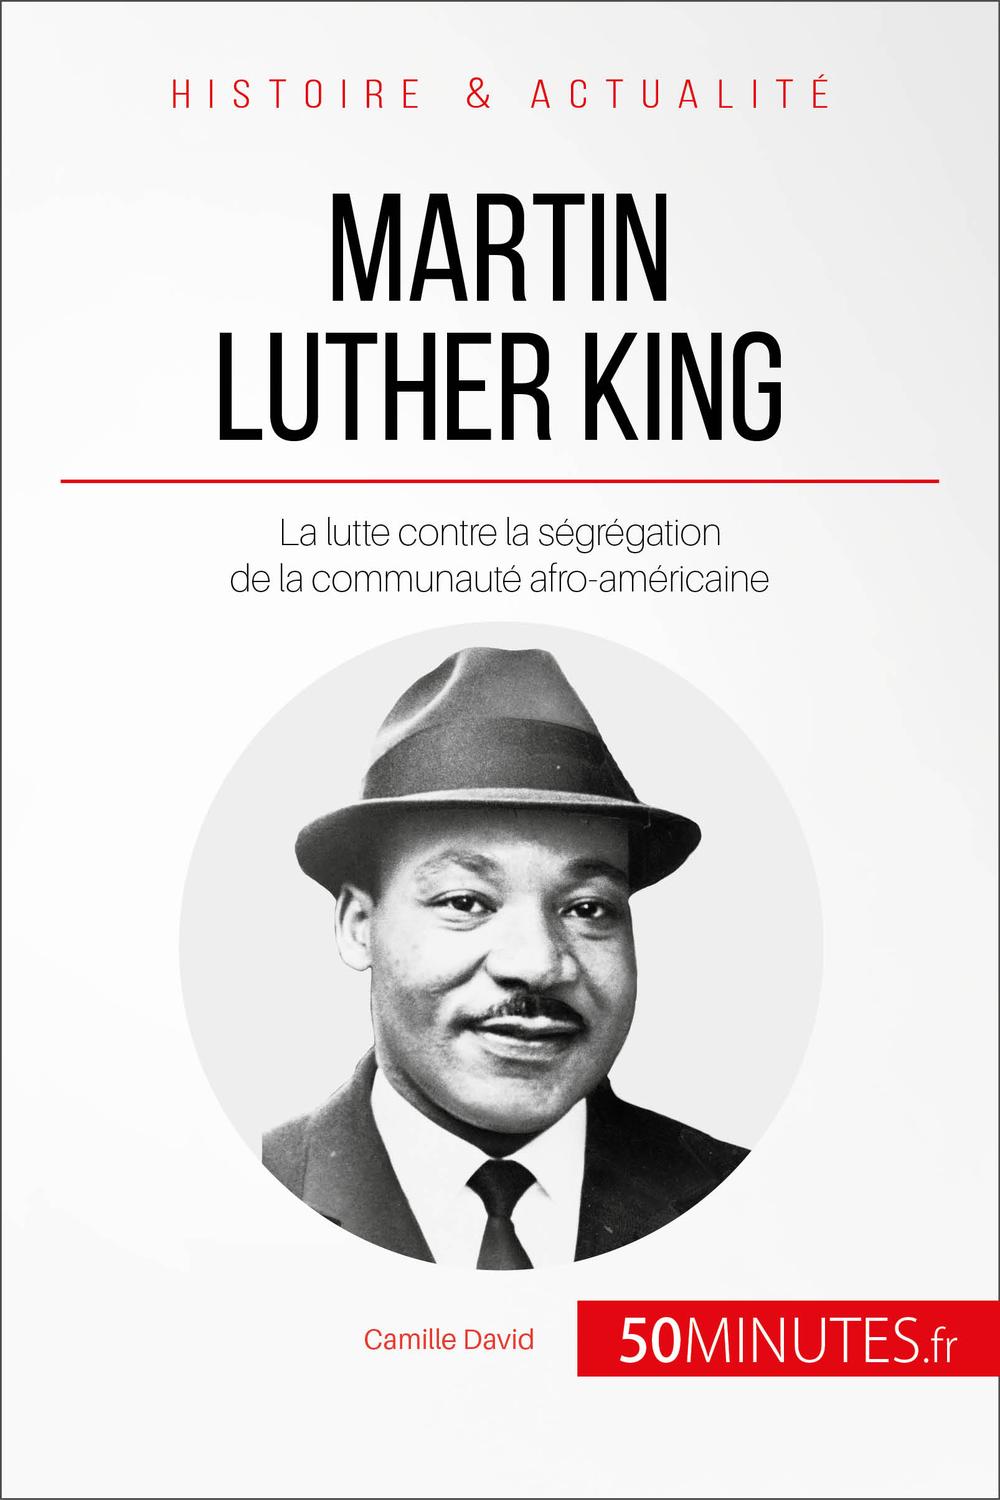 Martin Luther King - Camille David,  50minutes